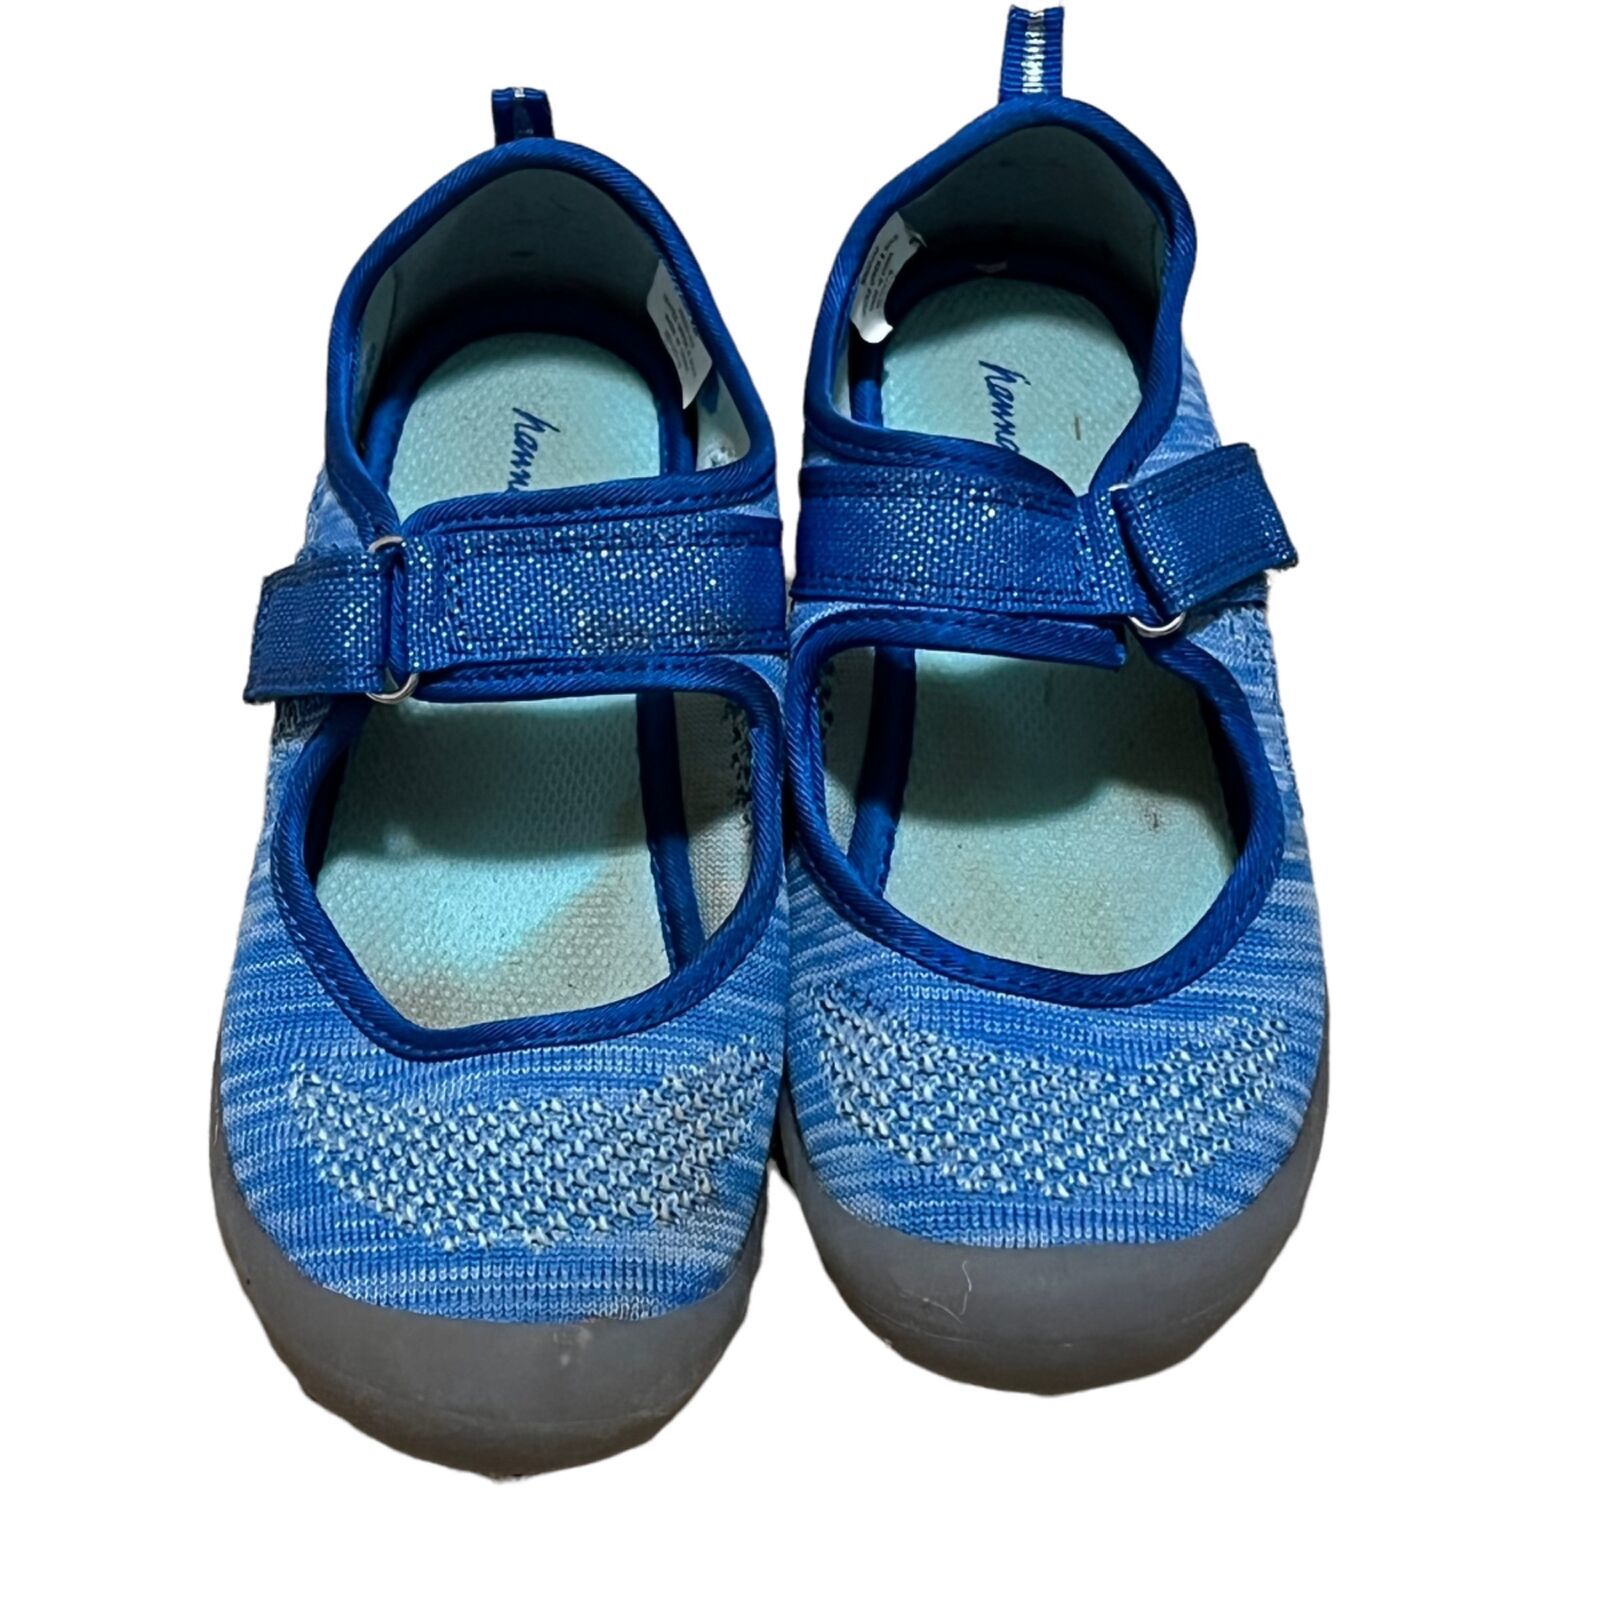 Hanna Andersson Blue Girls Sz 2 Big Girls Mary Jane Sneakers - $14.40